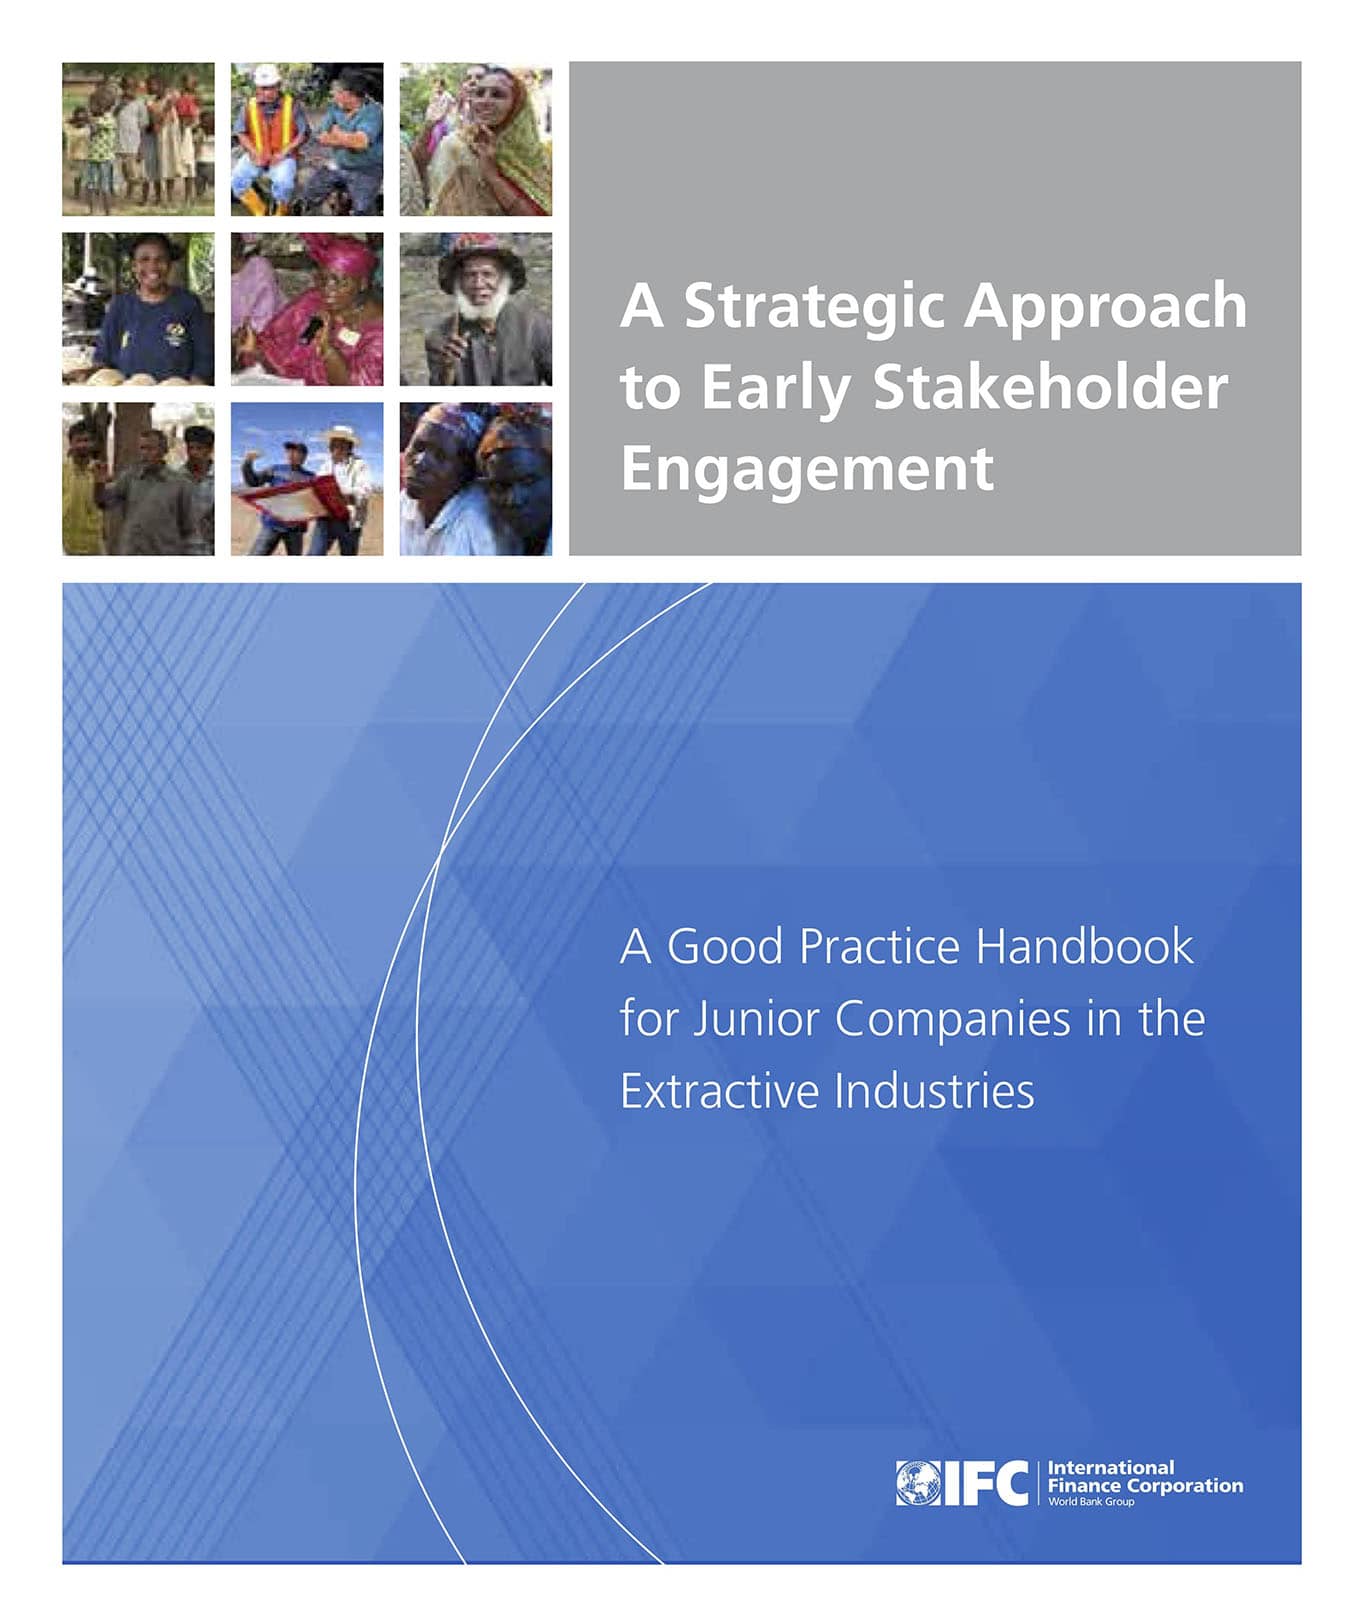 A Strategic Approach to Early Stakeholder Engagement - Good Practice Handbook for Junior Companies in the Extractive Industries (IFC, 2013)